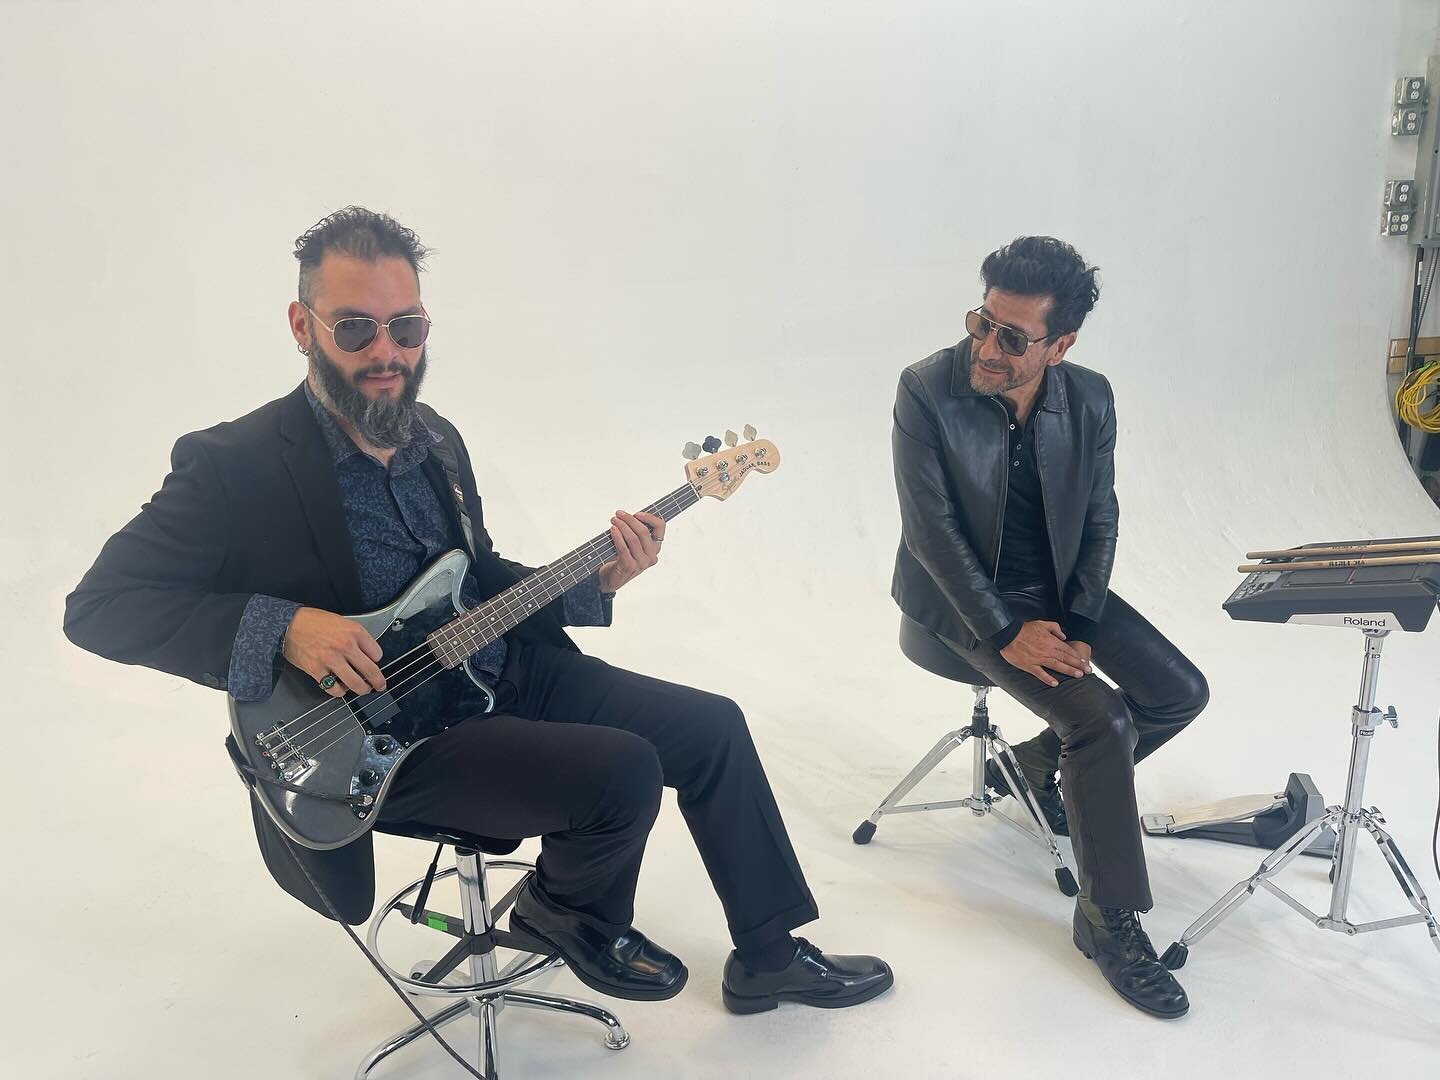 Video shoot today with @faridamusicofficial , @charlieondrums y @saulbolanomusic!